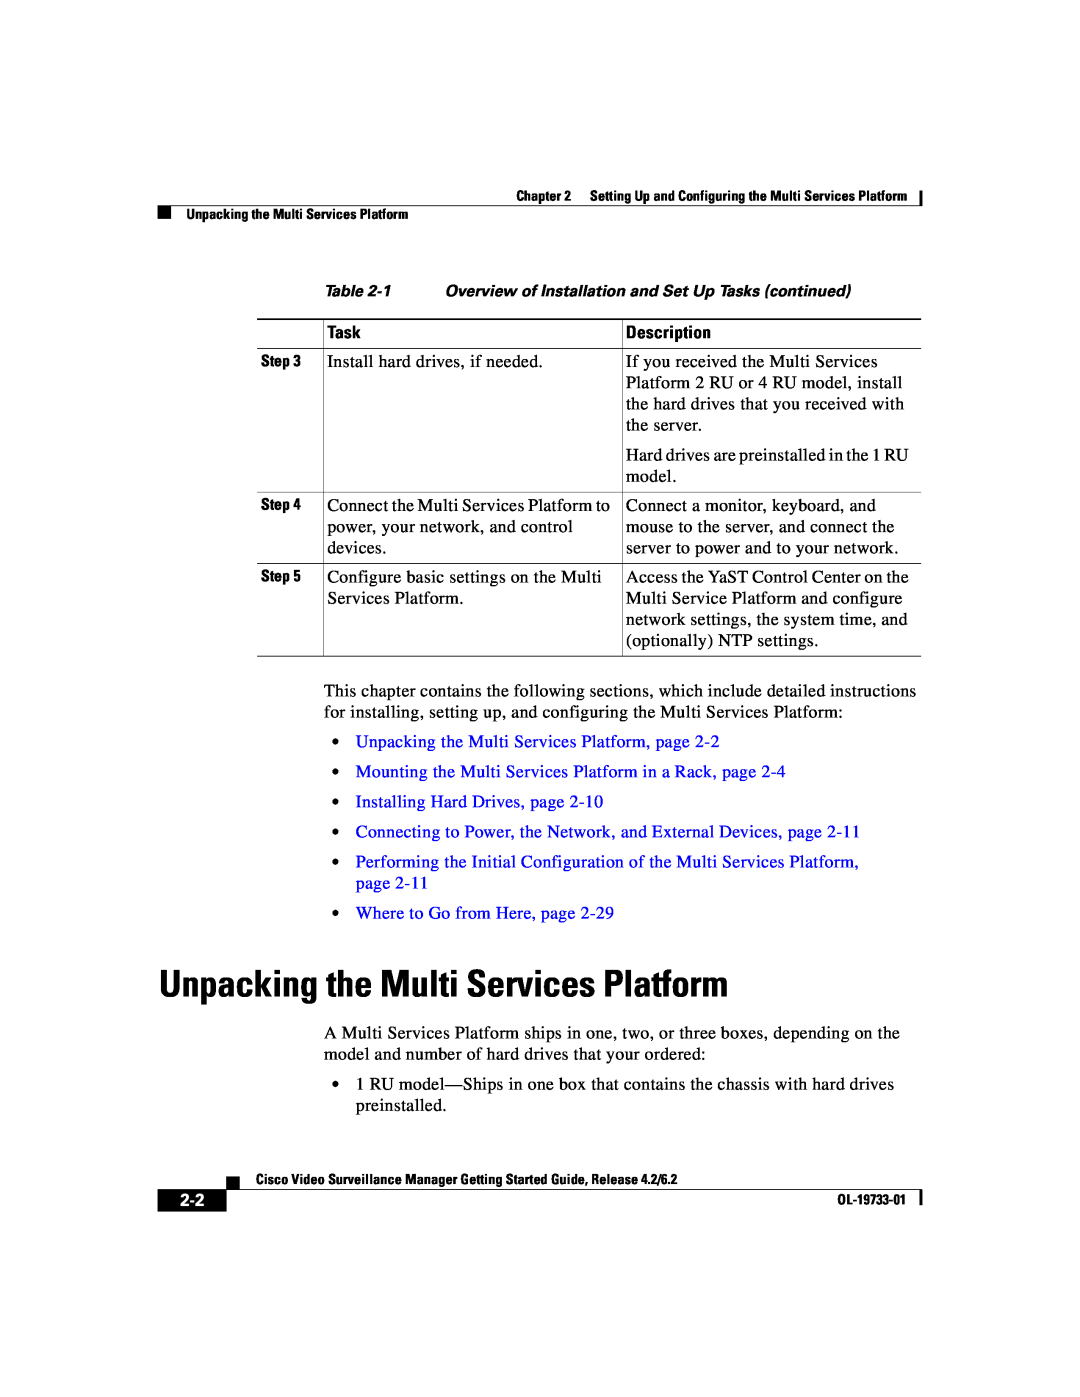 Cisco Systems 2 manual Task, Description, Unpacking the Multi Services Platform, page, Installing Hard Drives, page 